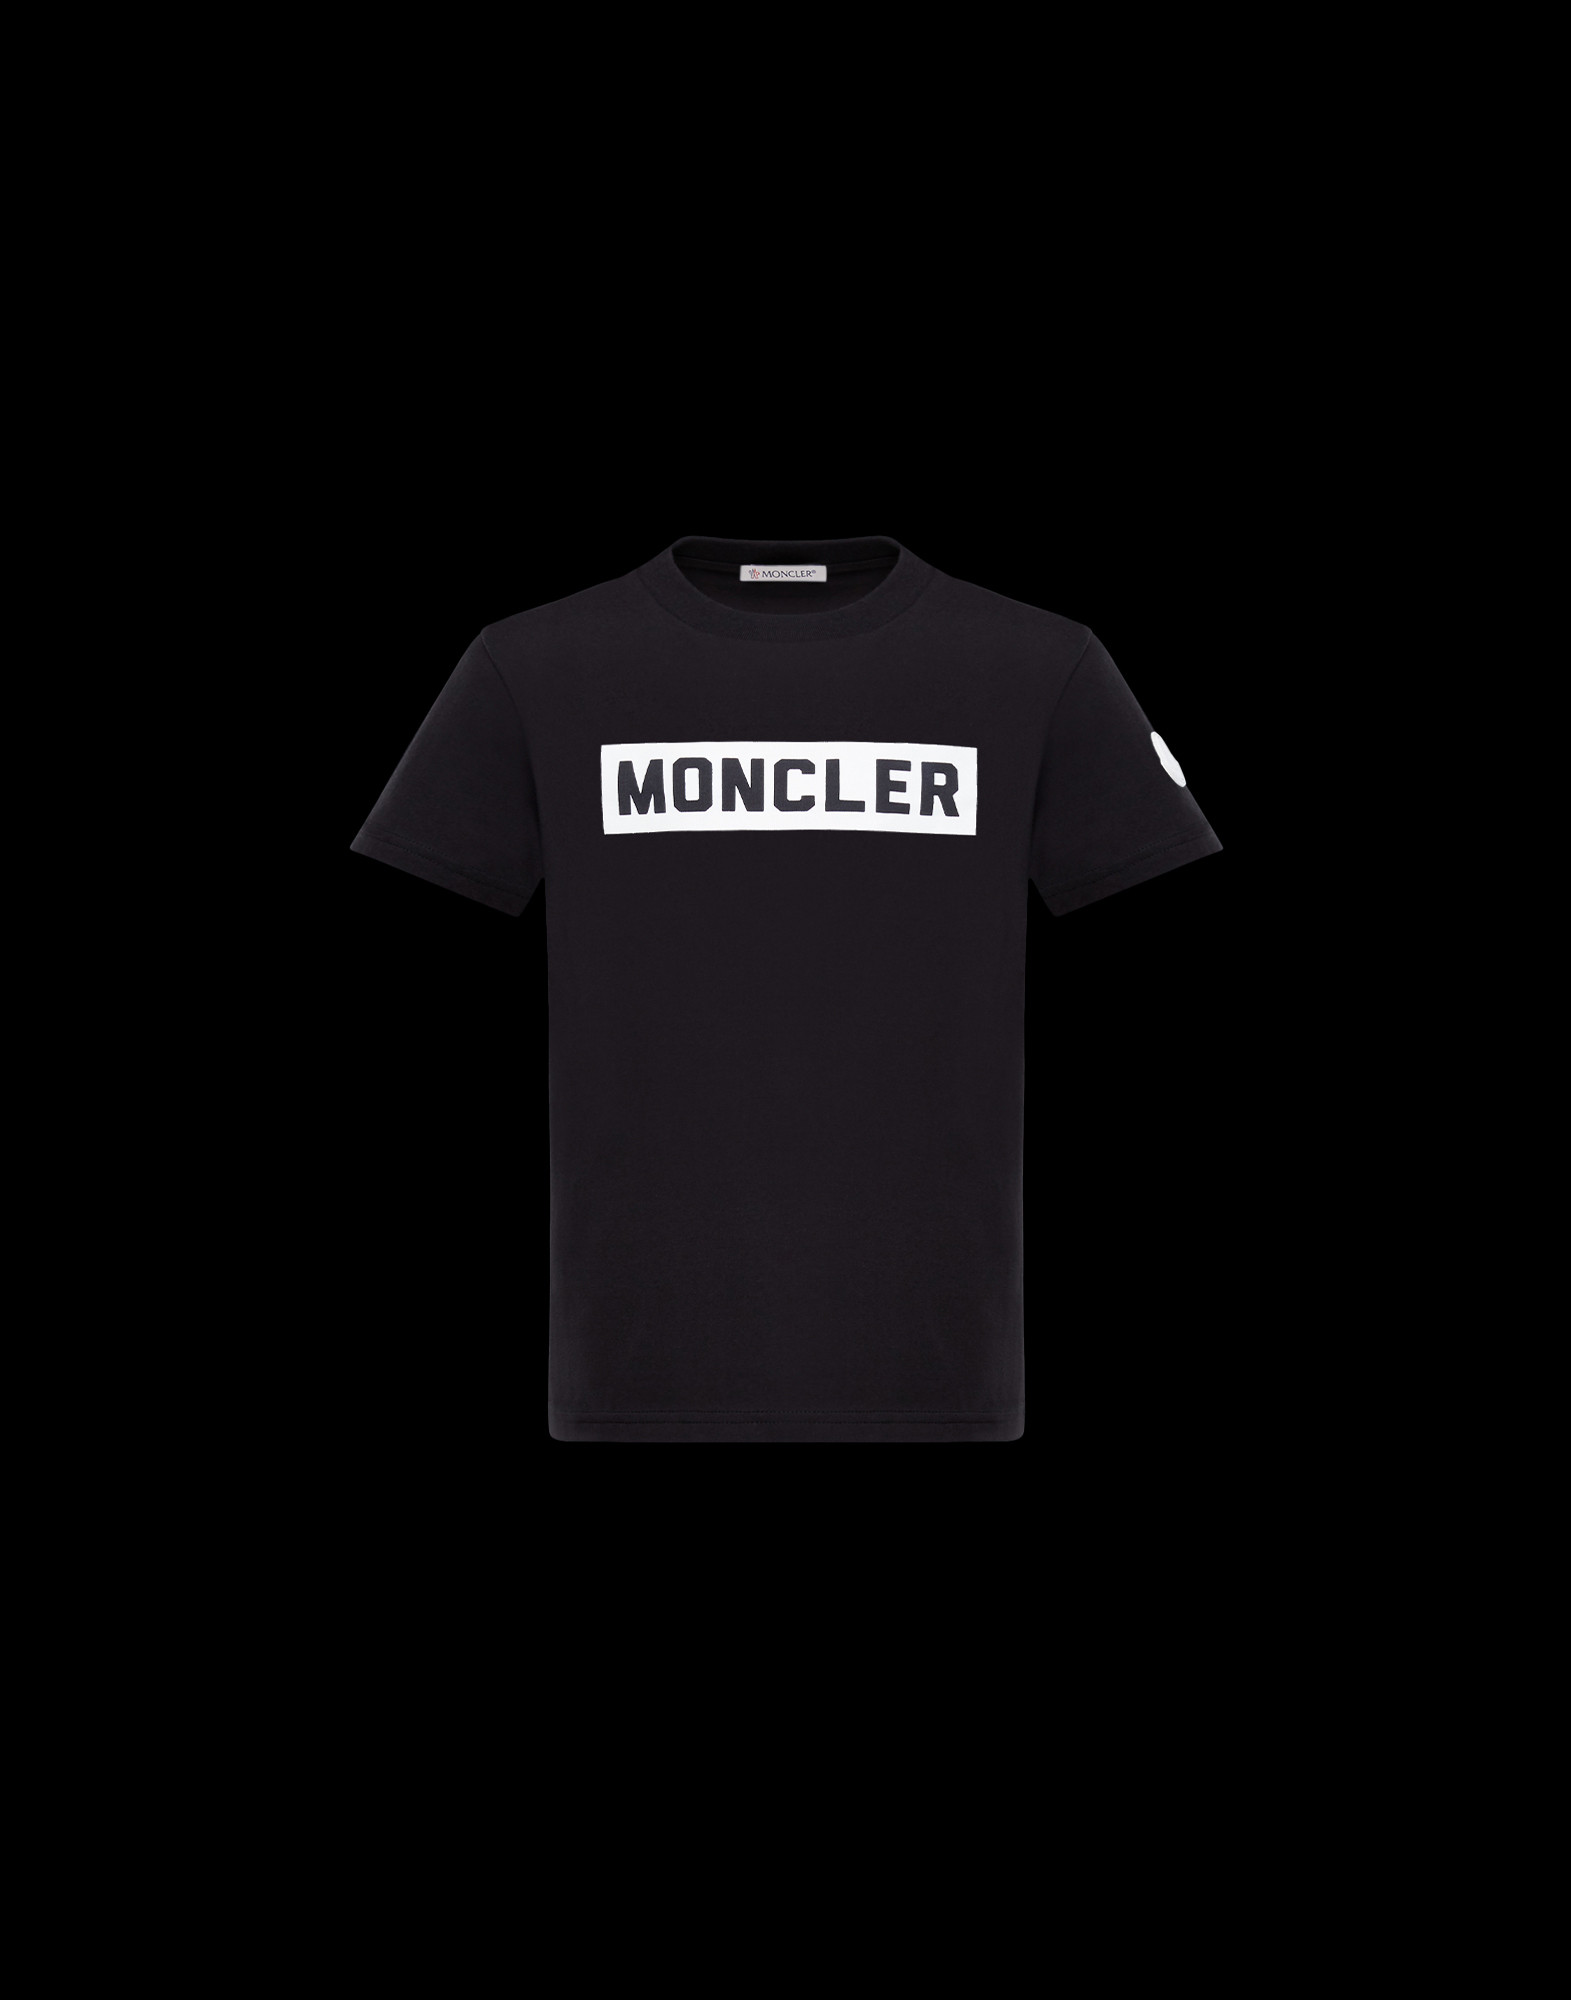 Moncler T-SHIRT for Man, T-shirts | Official Online Store